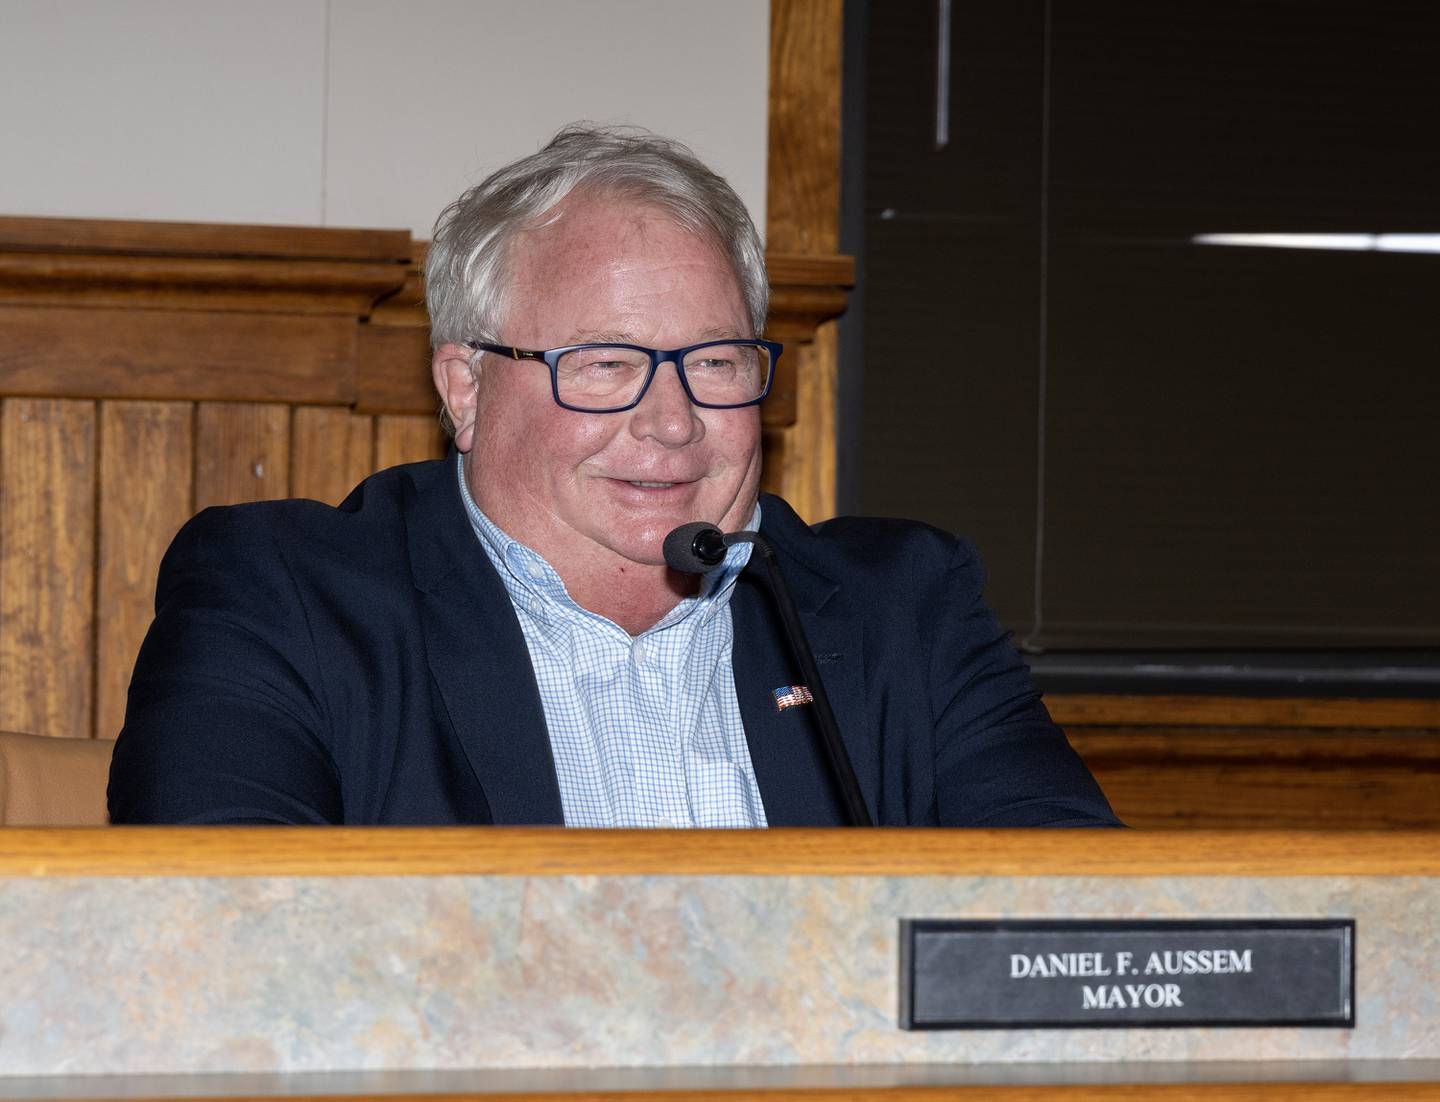 Daniel Aussem presides over his final City Council meeting as mayor on Tuesday, May 2, 2023.